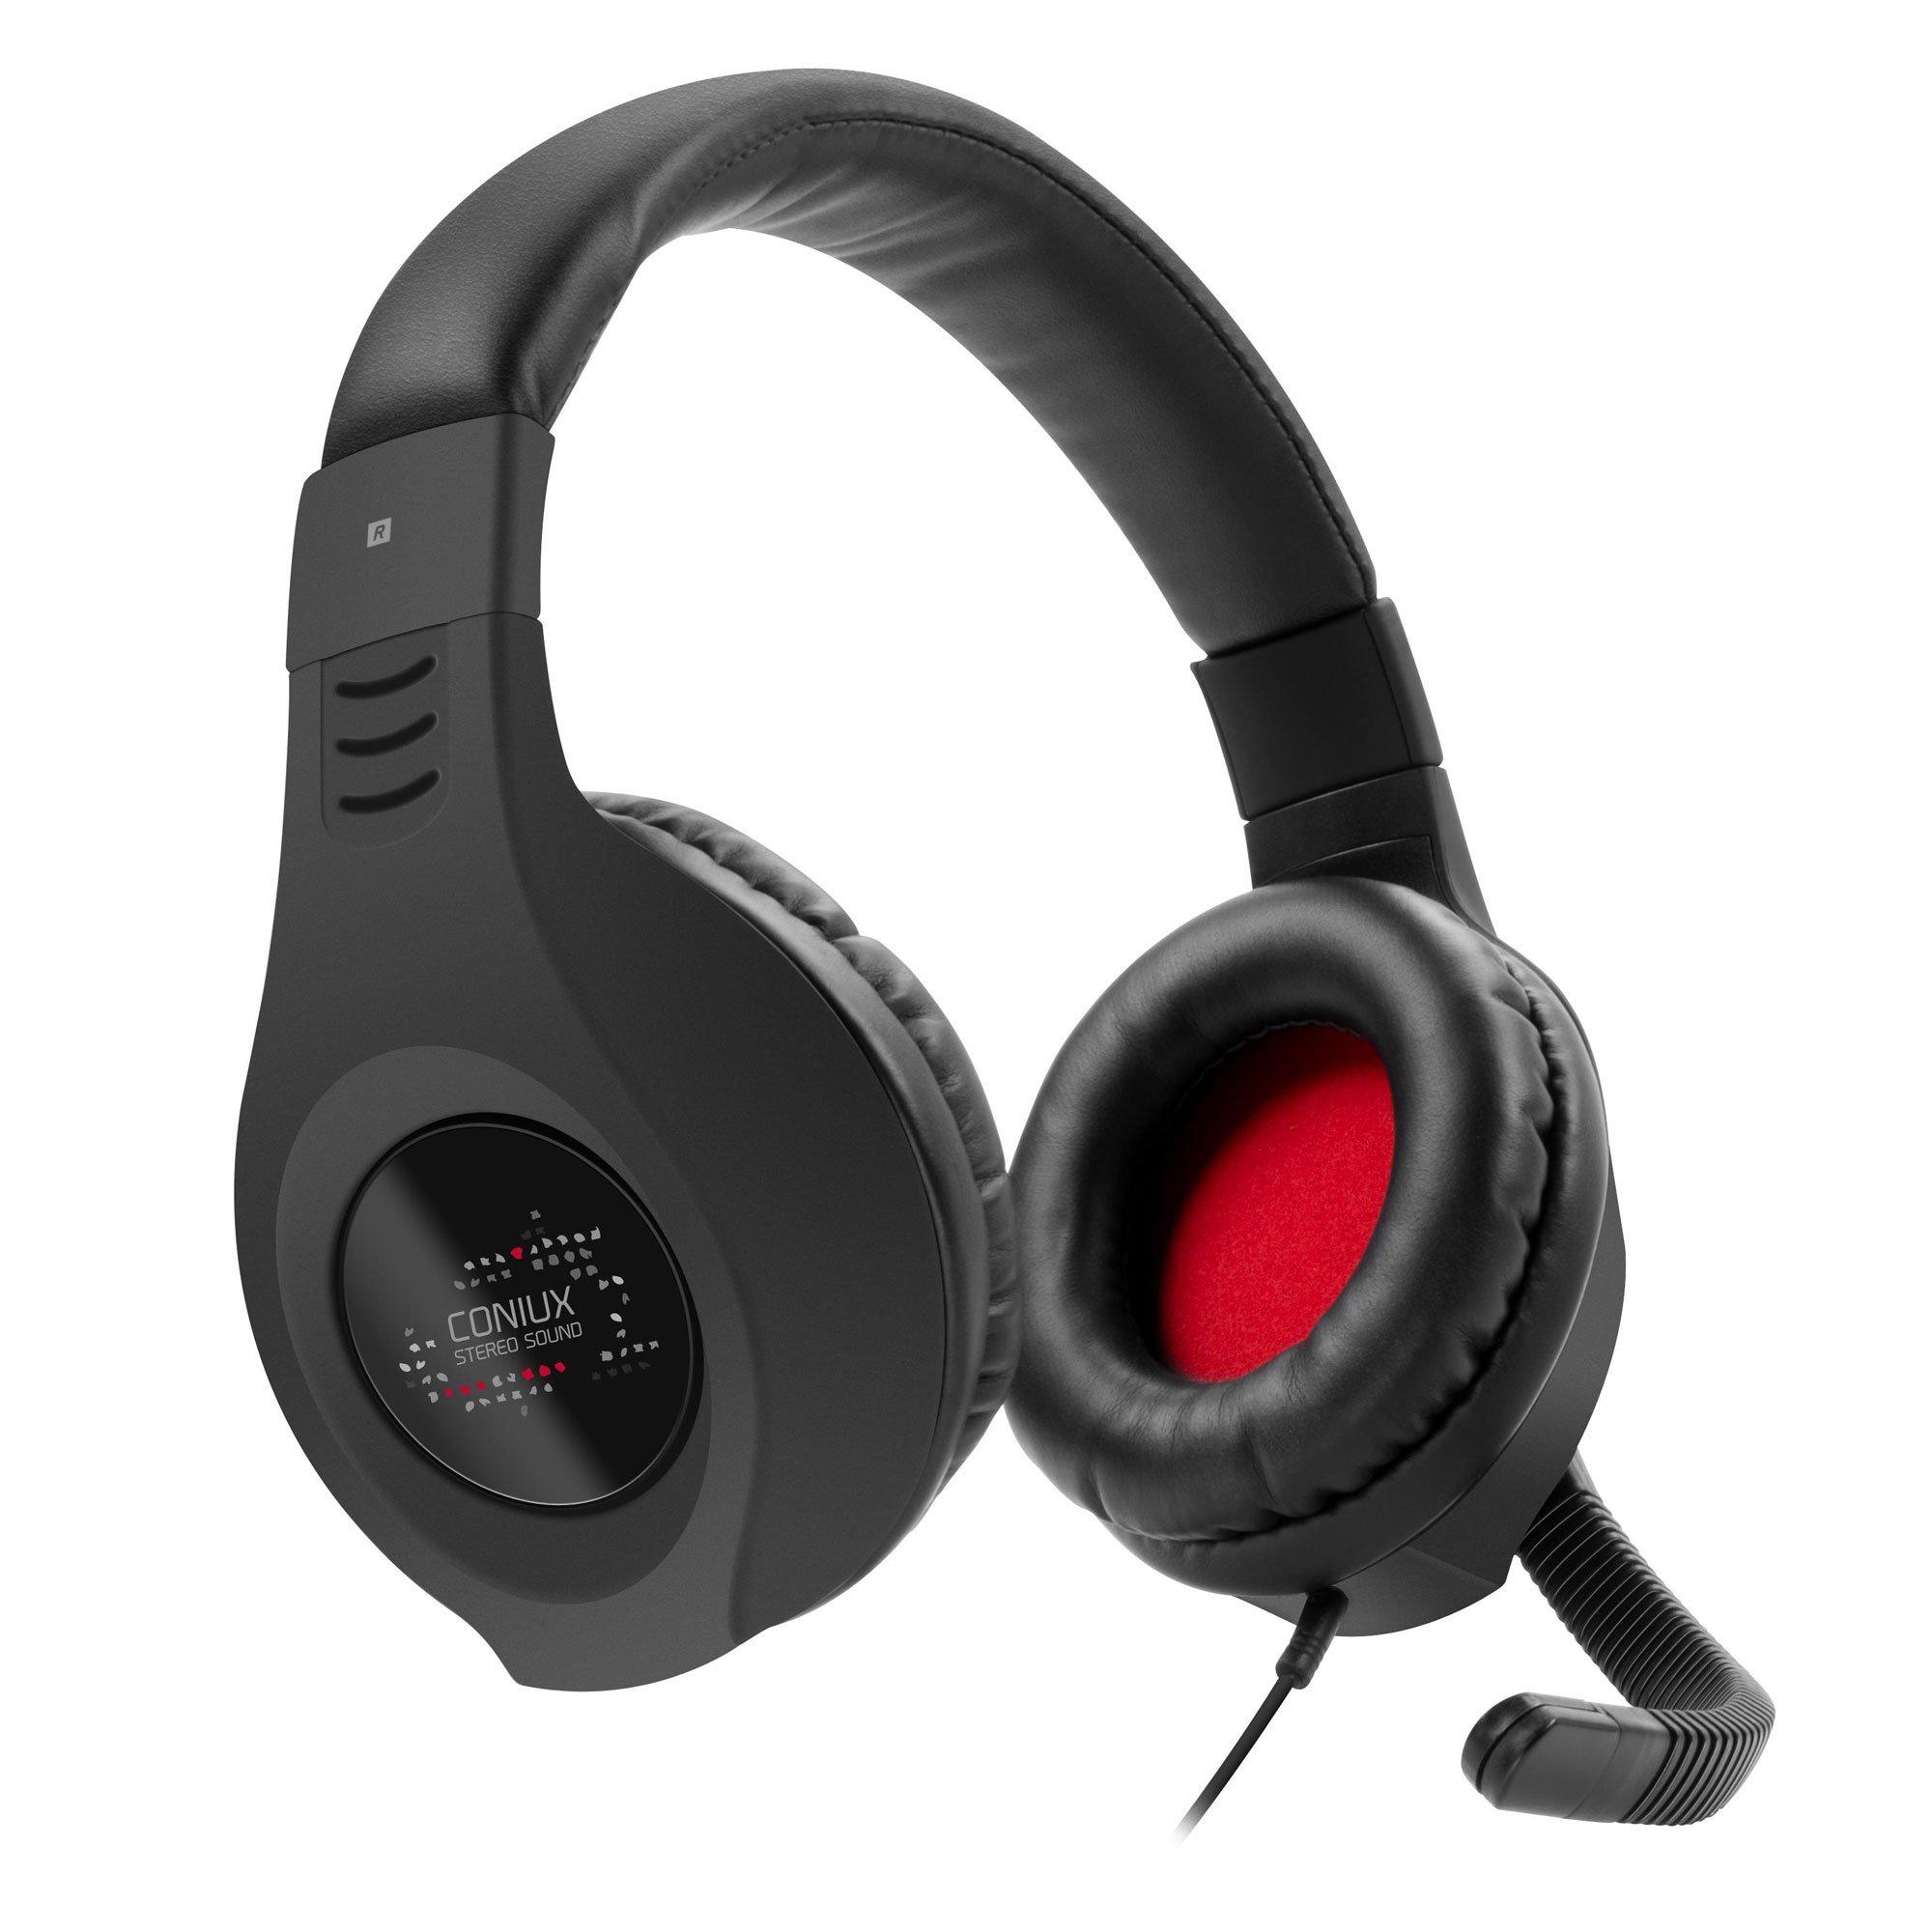 Image of SPEEDLINK Coniux Stereo for PS4 Gaming-Headset